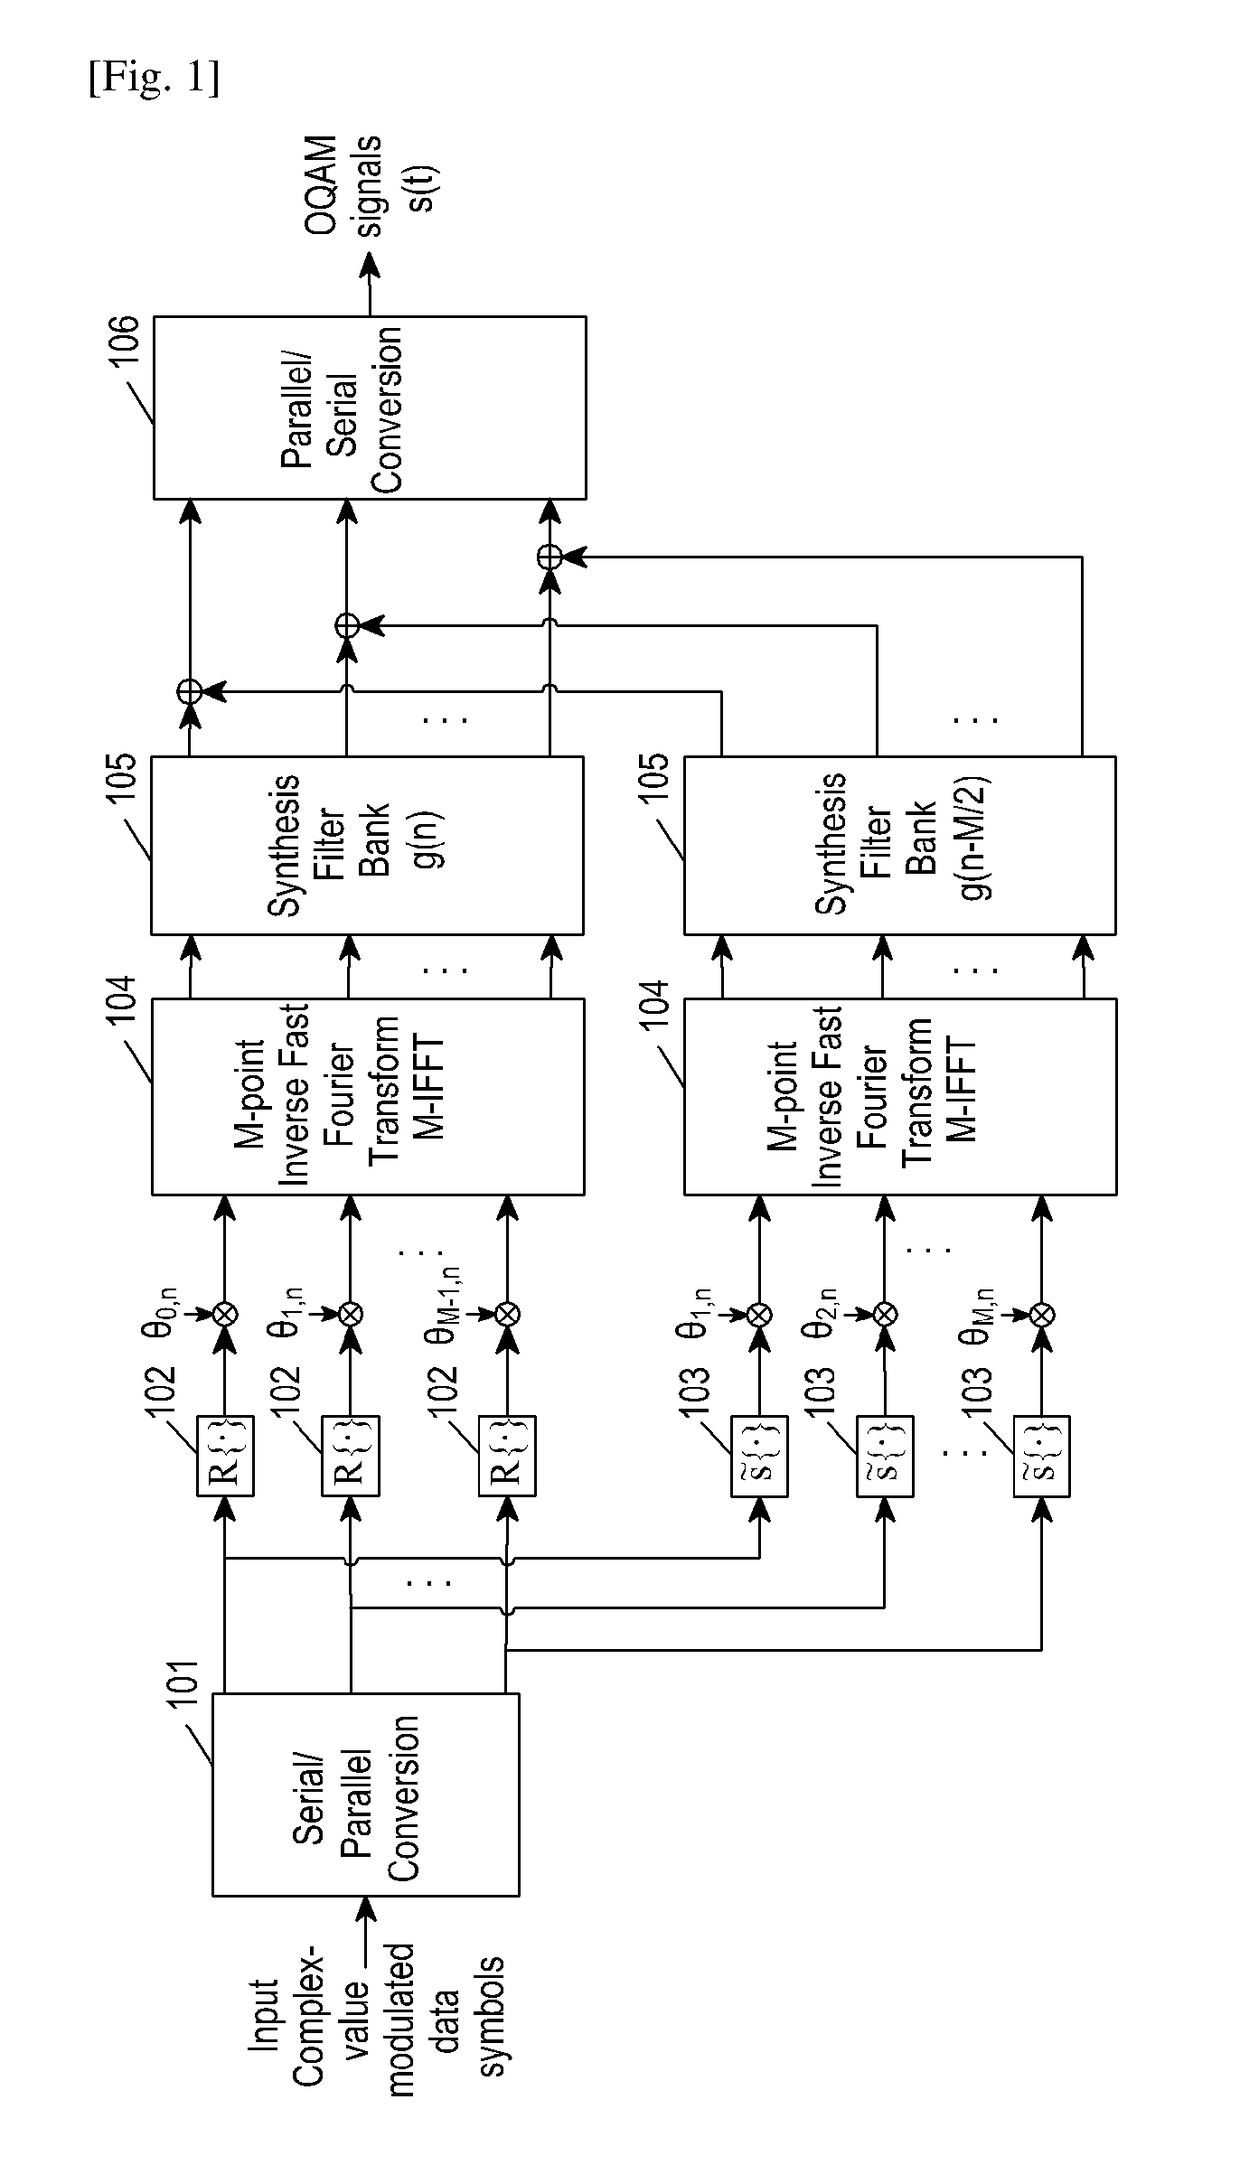 Method and apparatus for generating, transmitting and receiving signals based on filter bank in wireless communication system